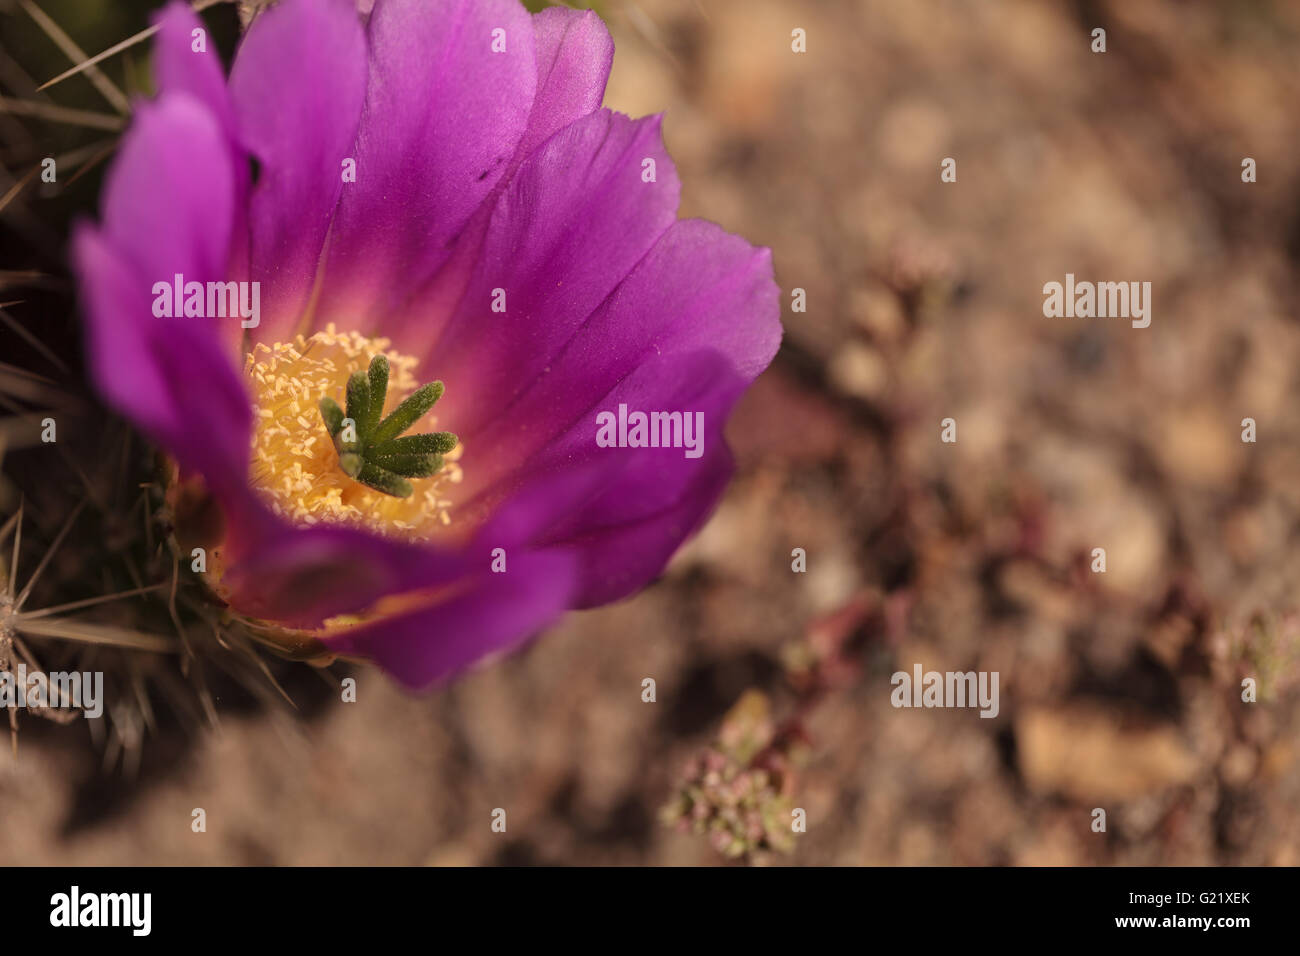 Hot pink flowers with a green stamen found on Ferocactus emoryi blooms on a cactus in Arizona. Stock Photo